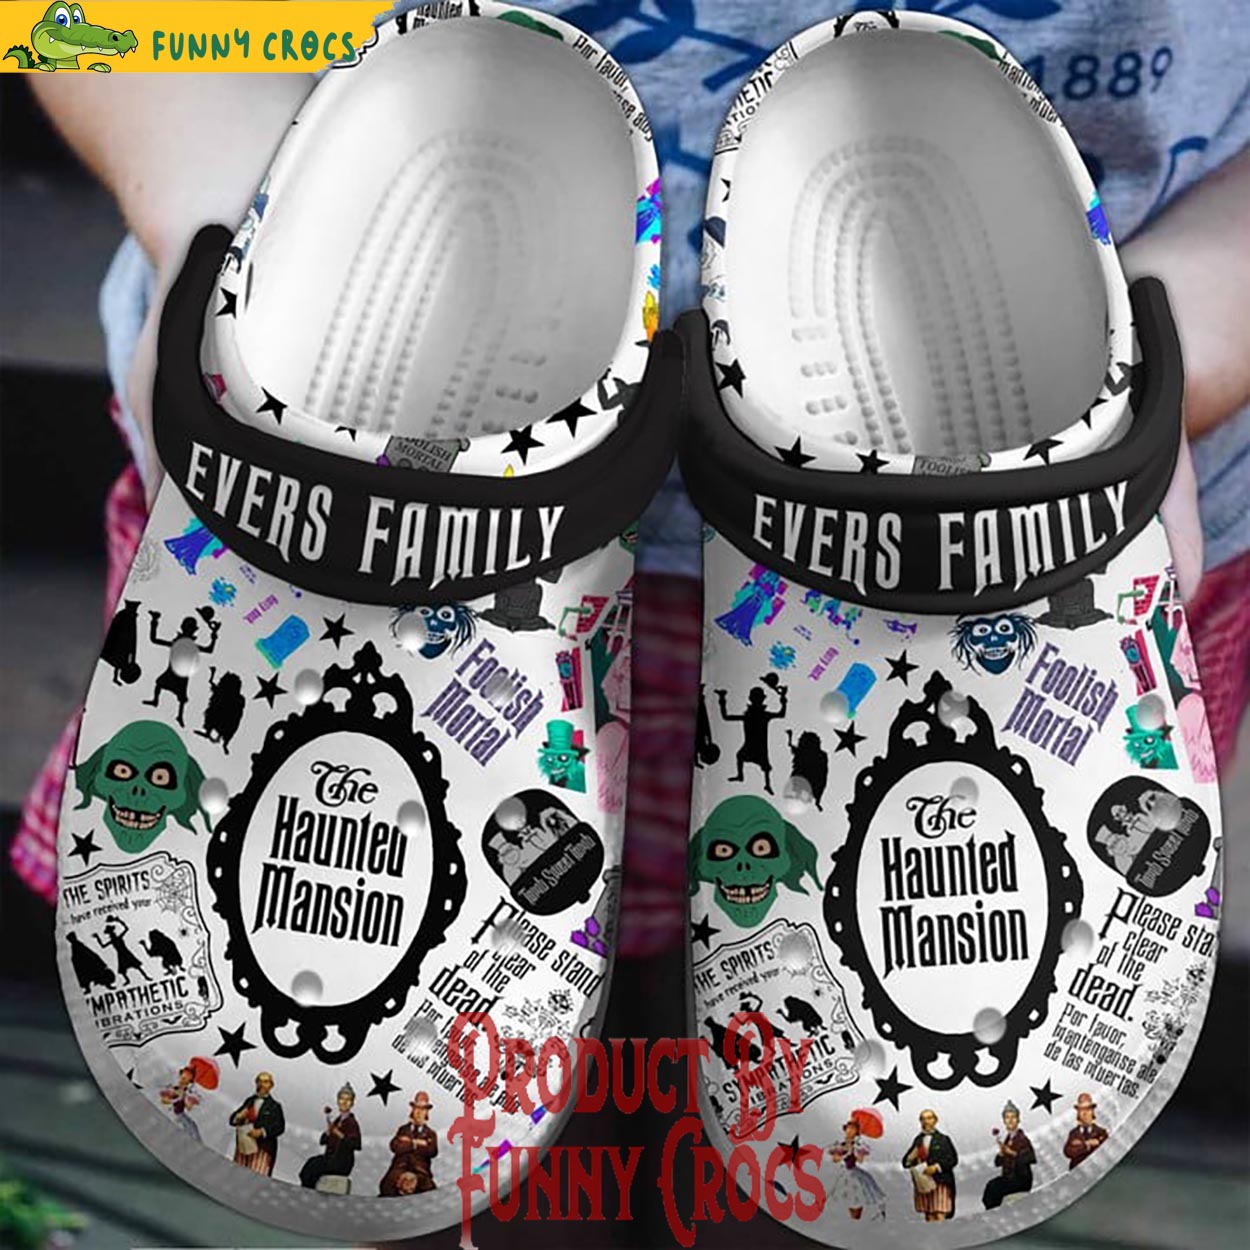 Evers Family The Haunted Mansion Crocs